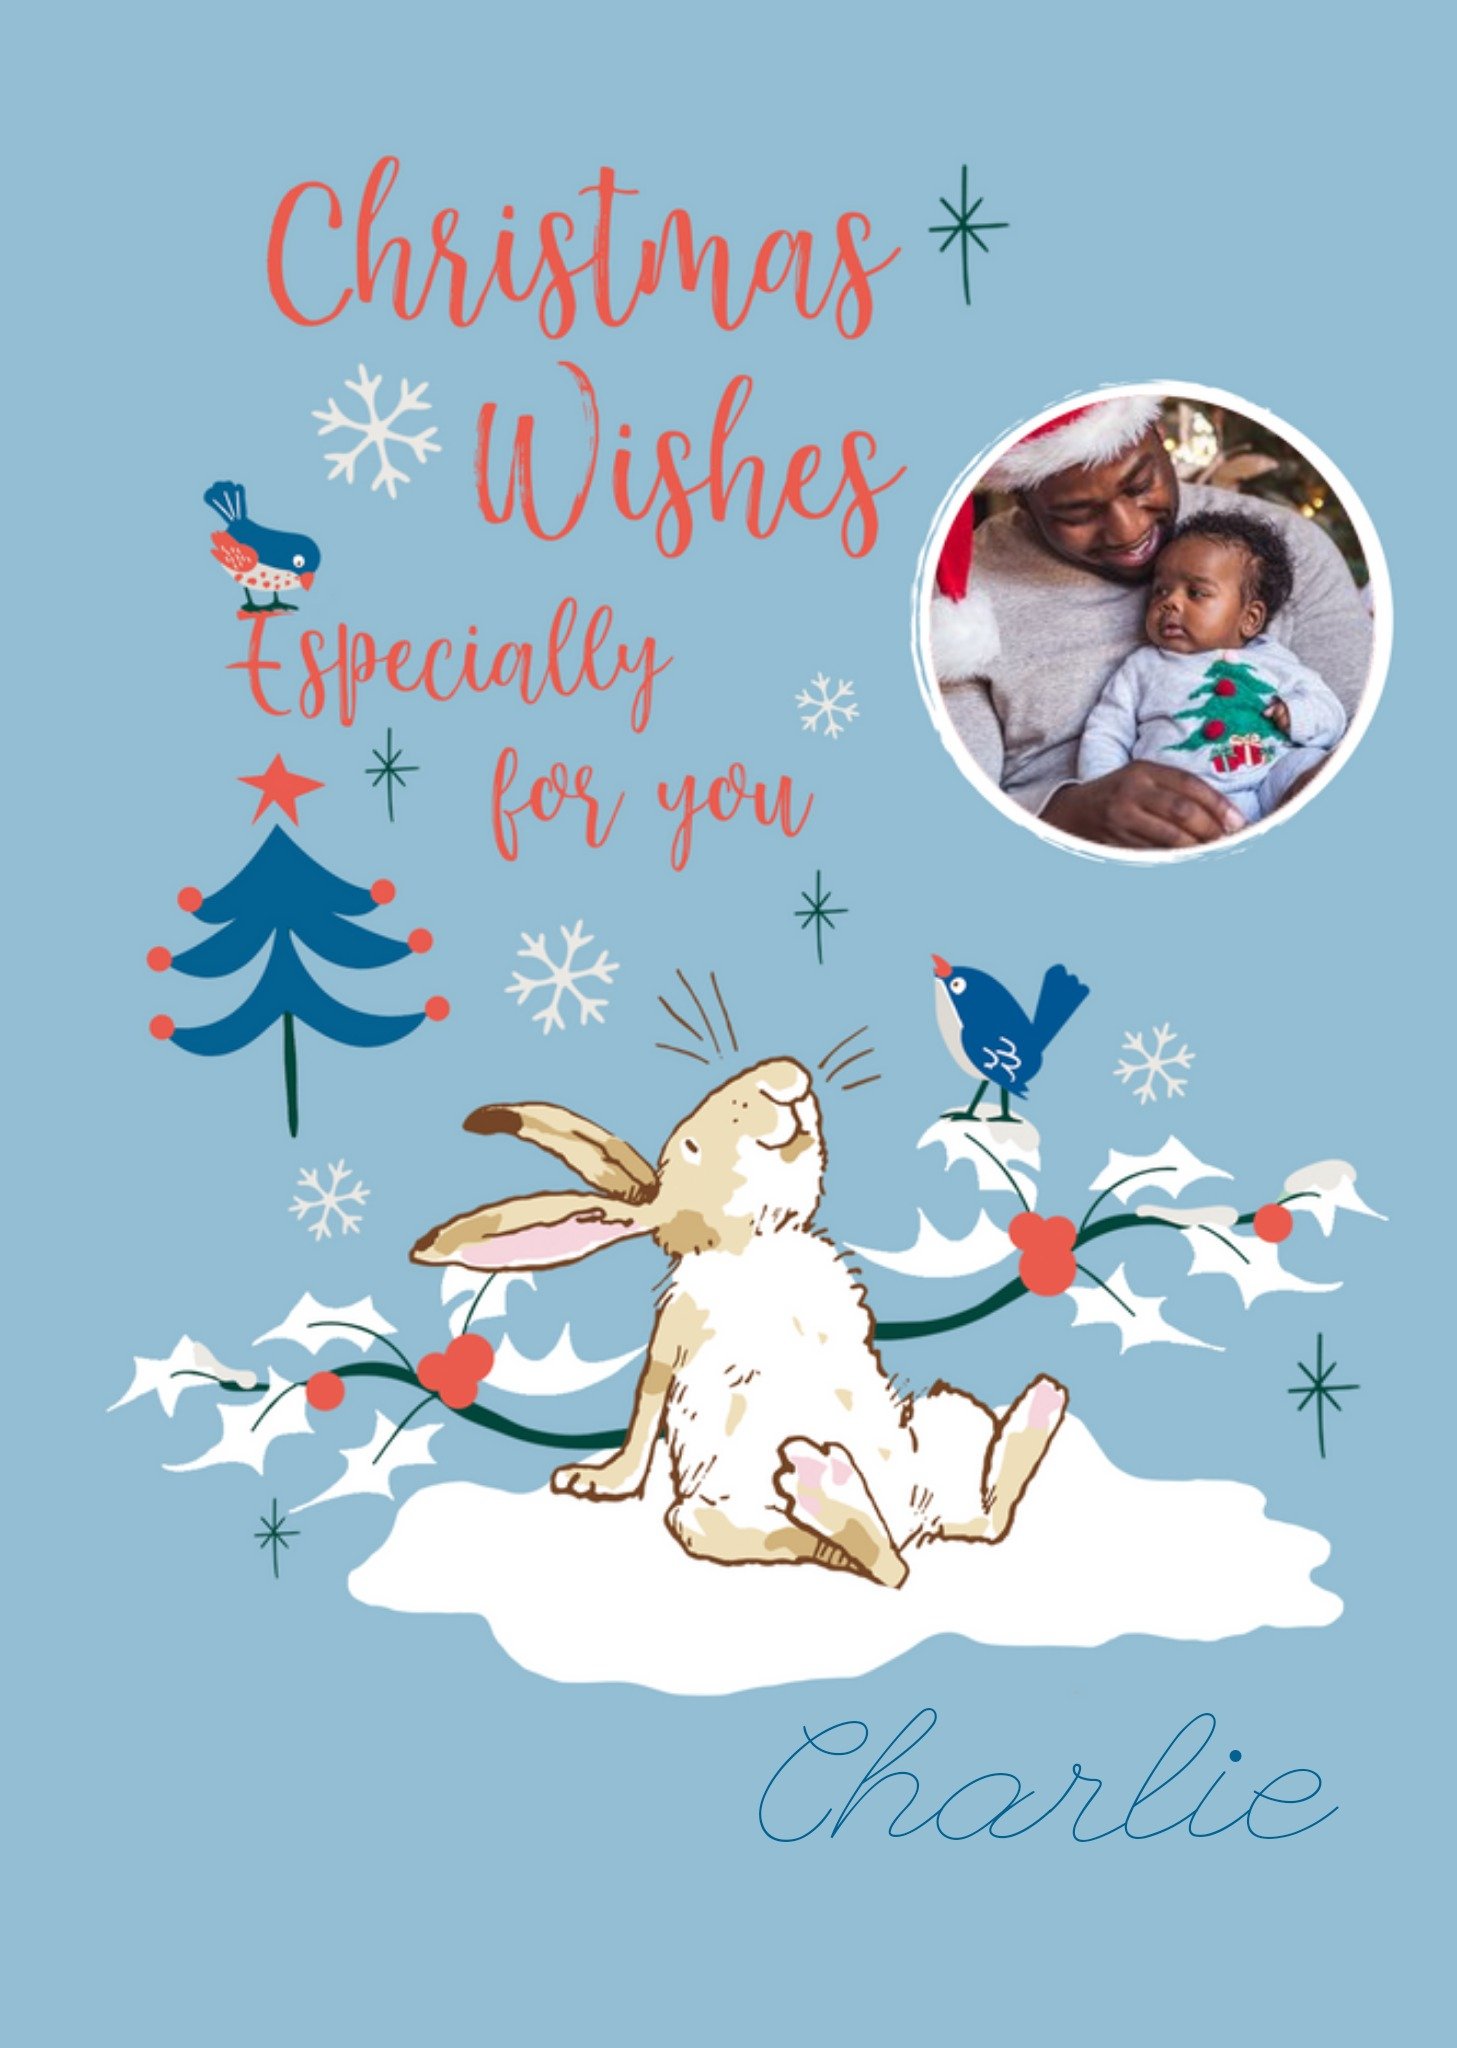 Guess How Much I Love You Danilo Ghmily Christmas Wishes Photo Upload Card Ecard